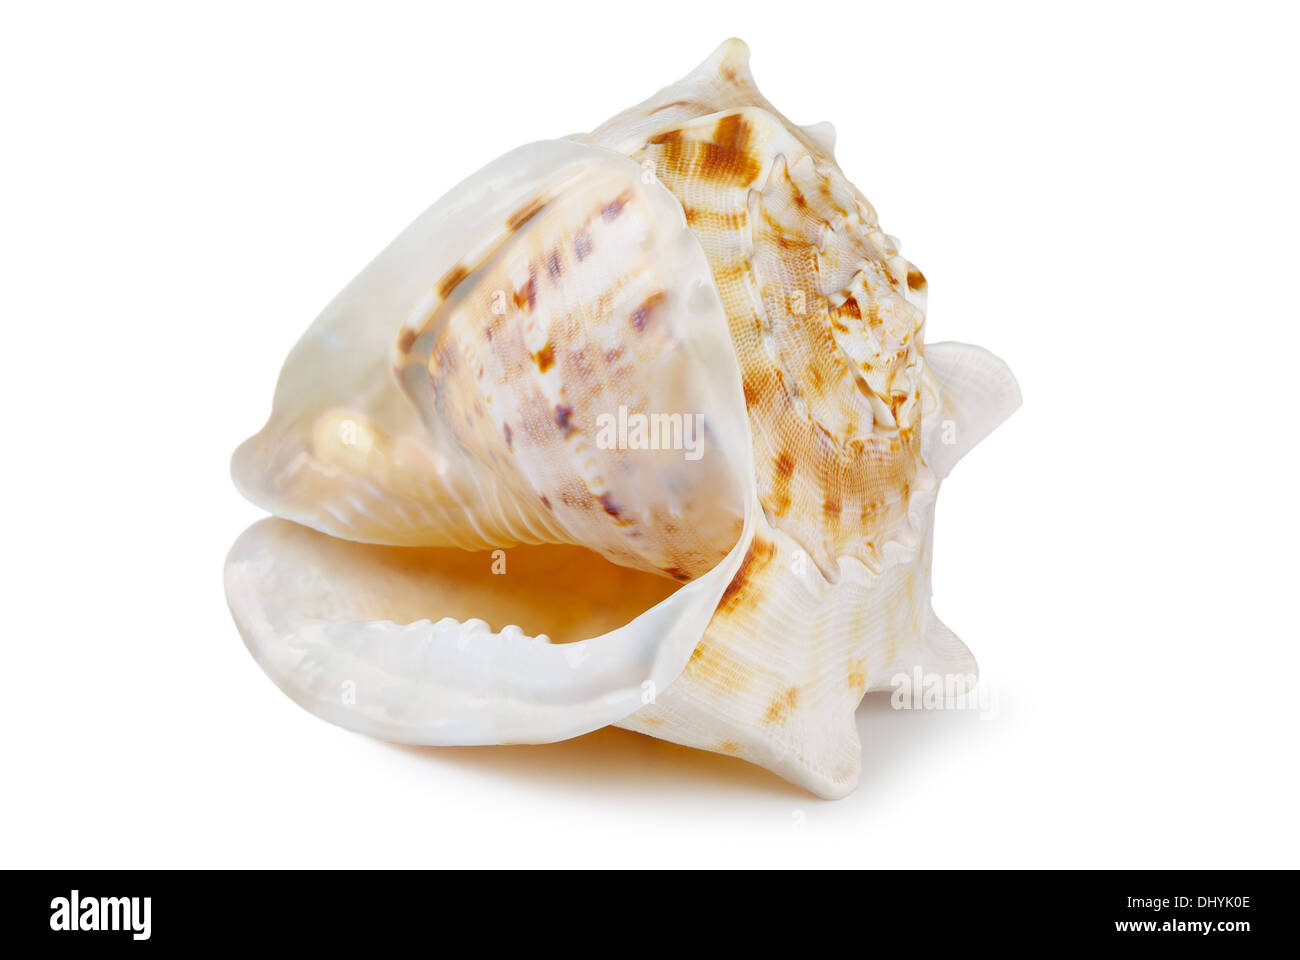 Big shell on a white background Stock Photo